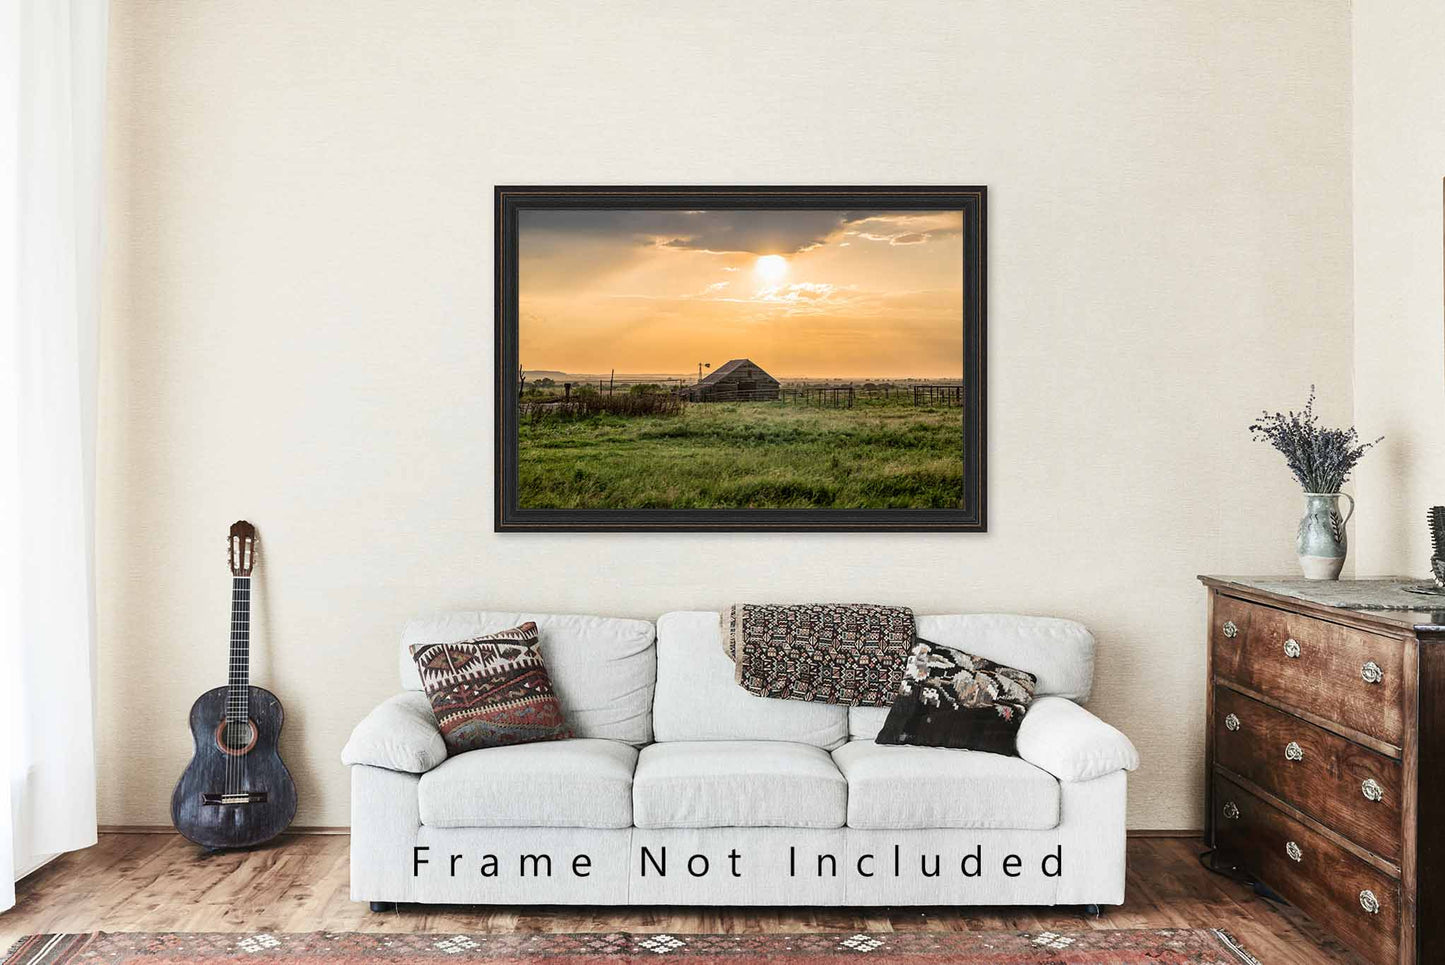 Country Picture - Fine Art Photography Print of Old Wooden Barn in Rural Oklahoma Rustic Farmhouse Artwork Wall Art Photo Decor